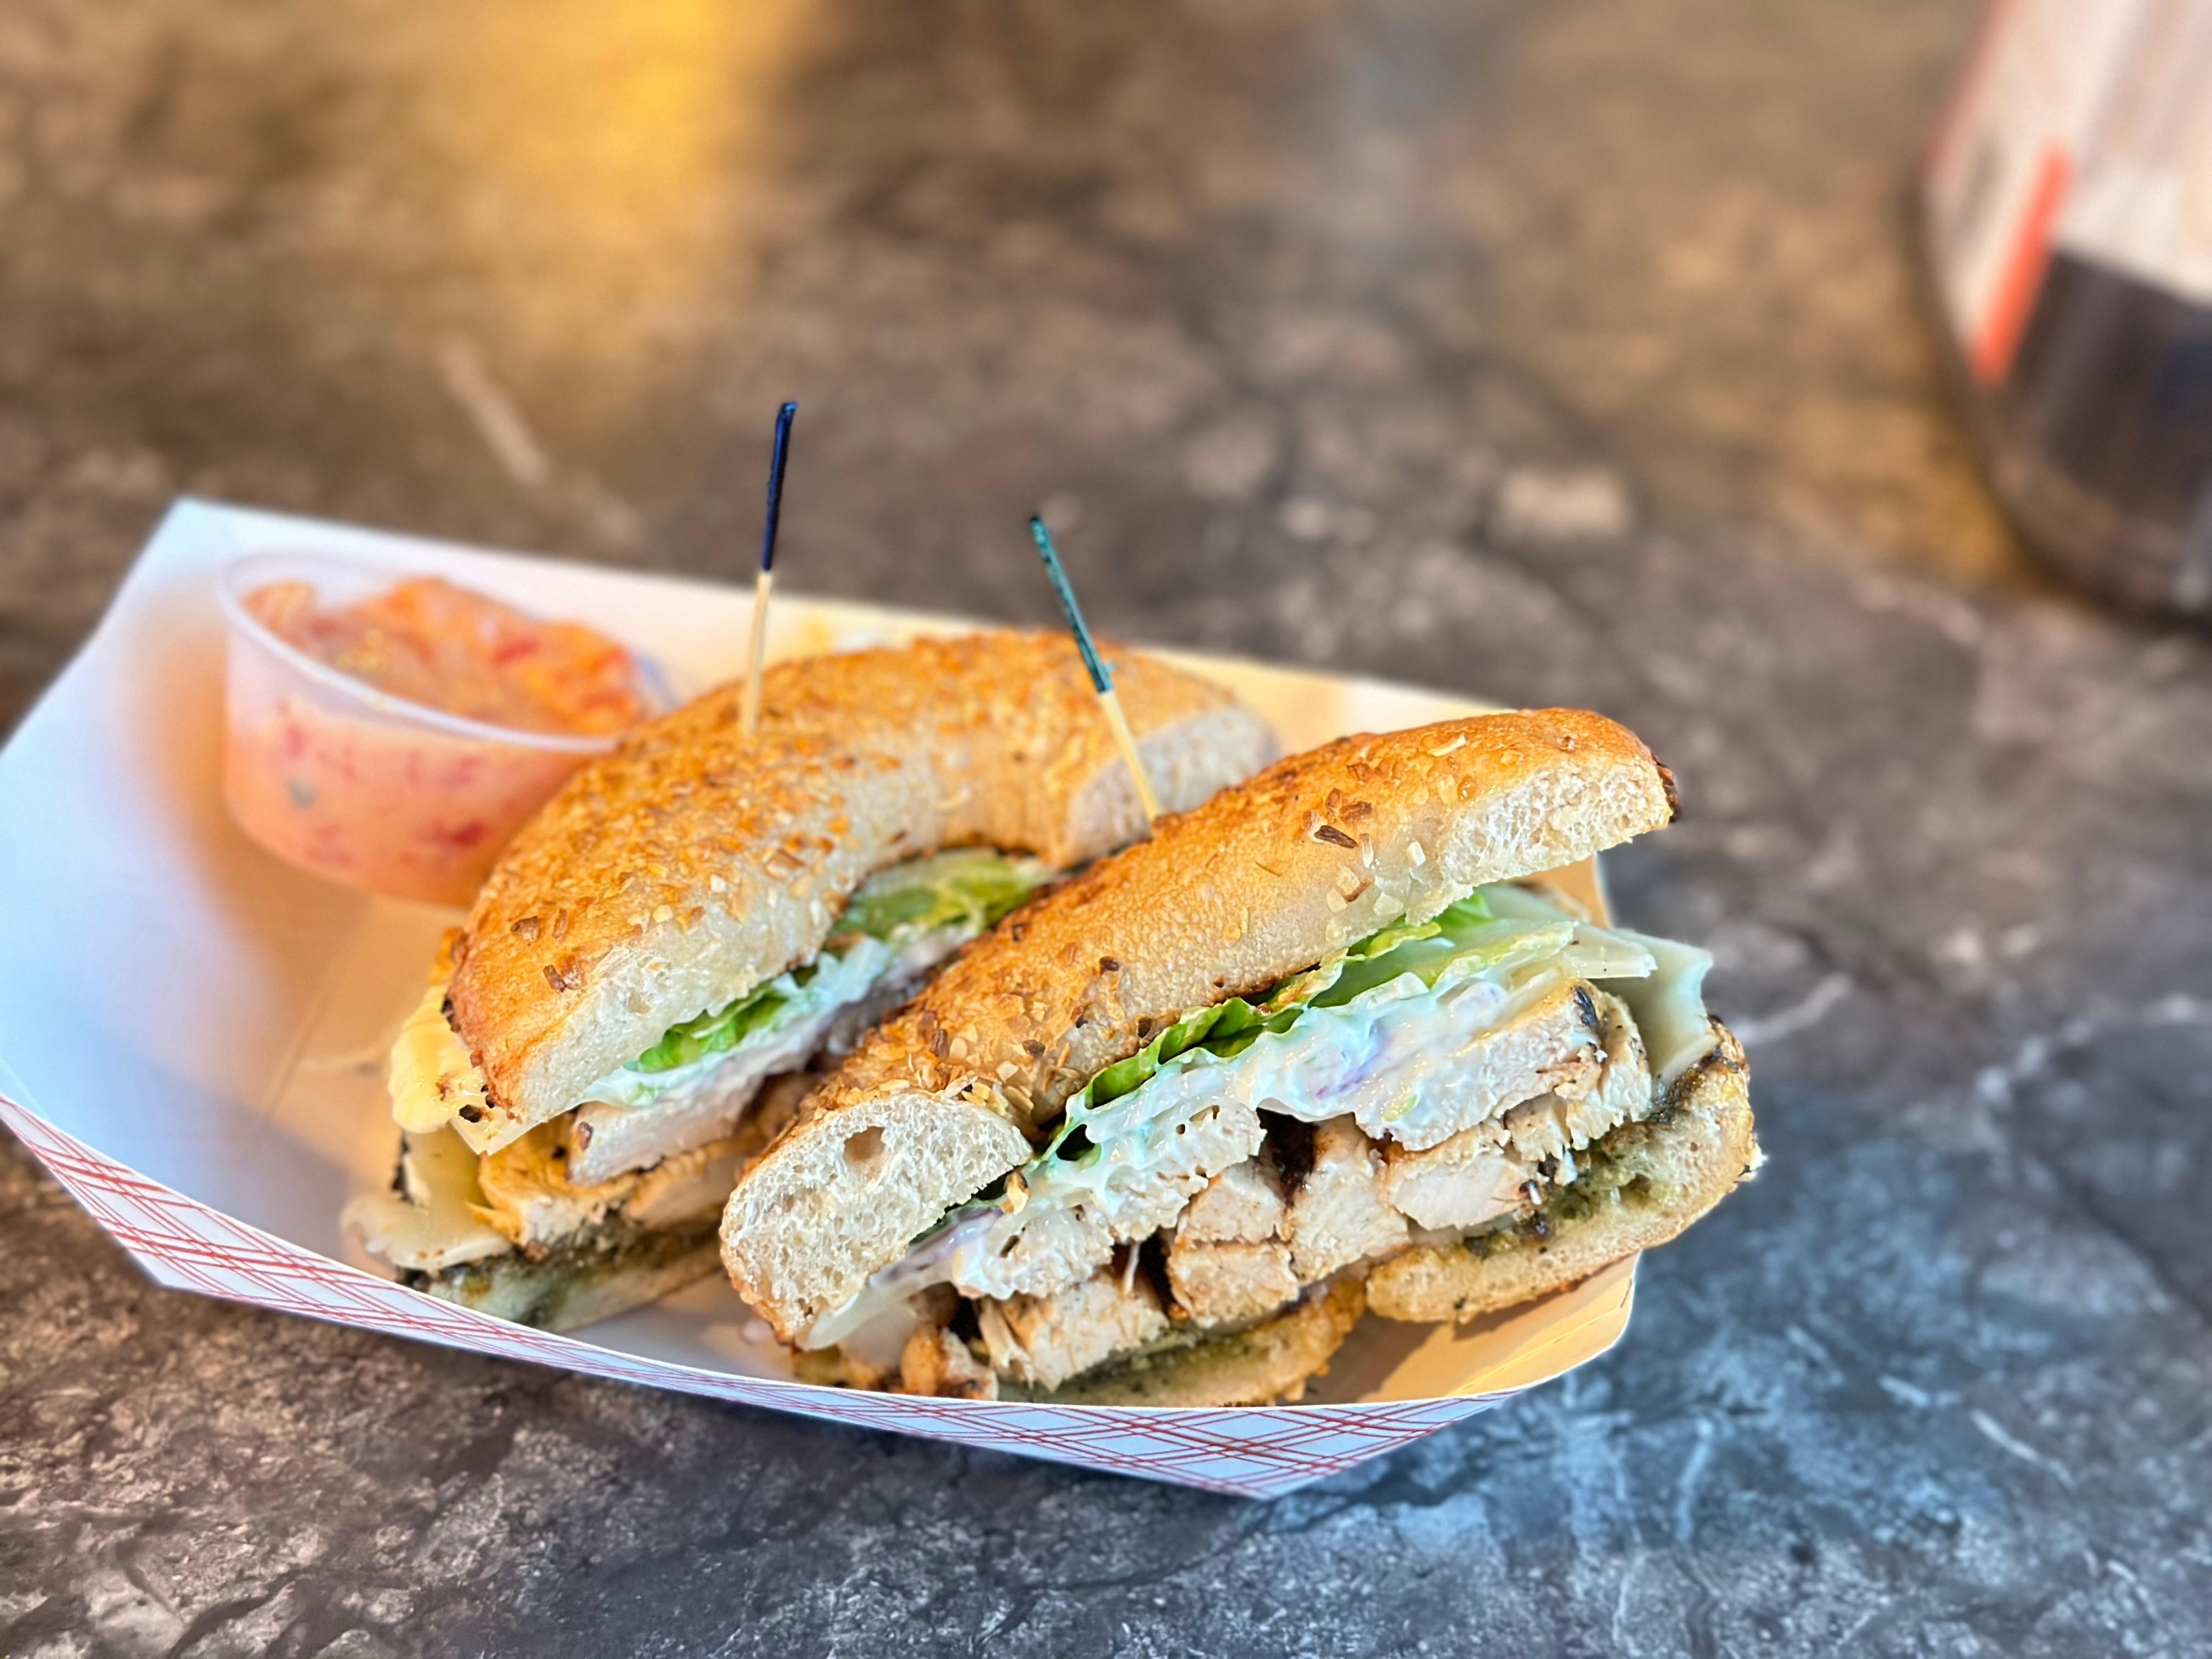 CHICKEN PESTO PROVOLONE BAGEL (grilled chicken, provolone, pesto, mayo, onions and lettuce on any choice of bagel)